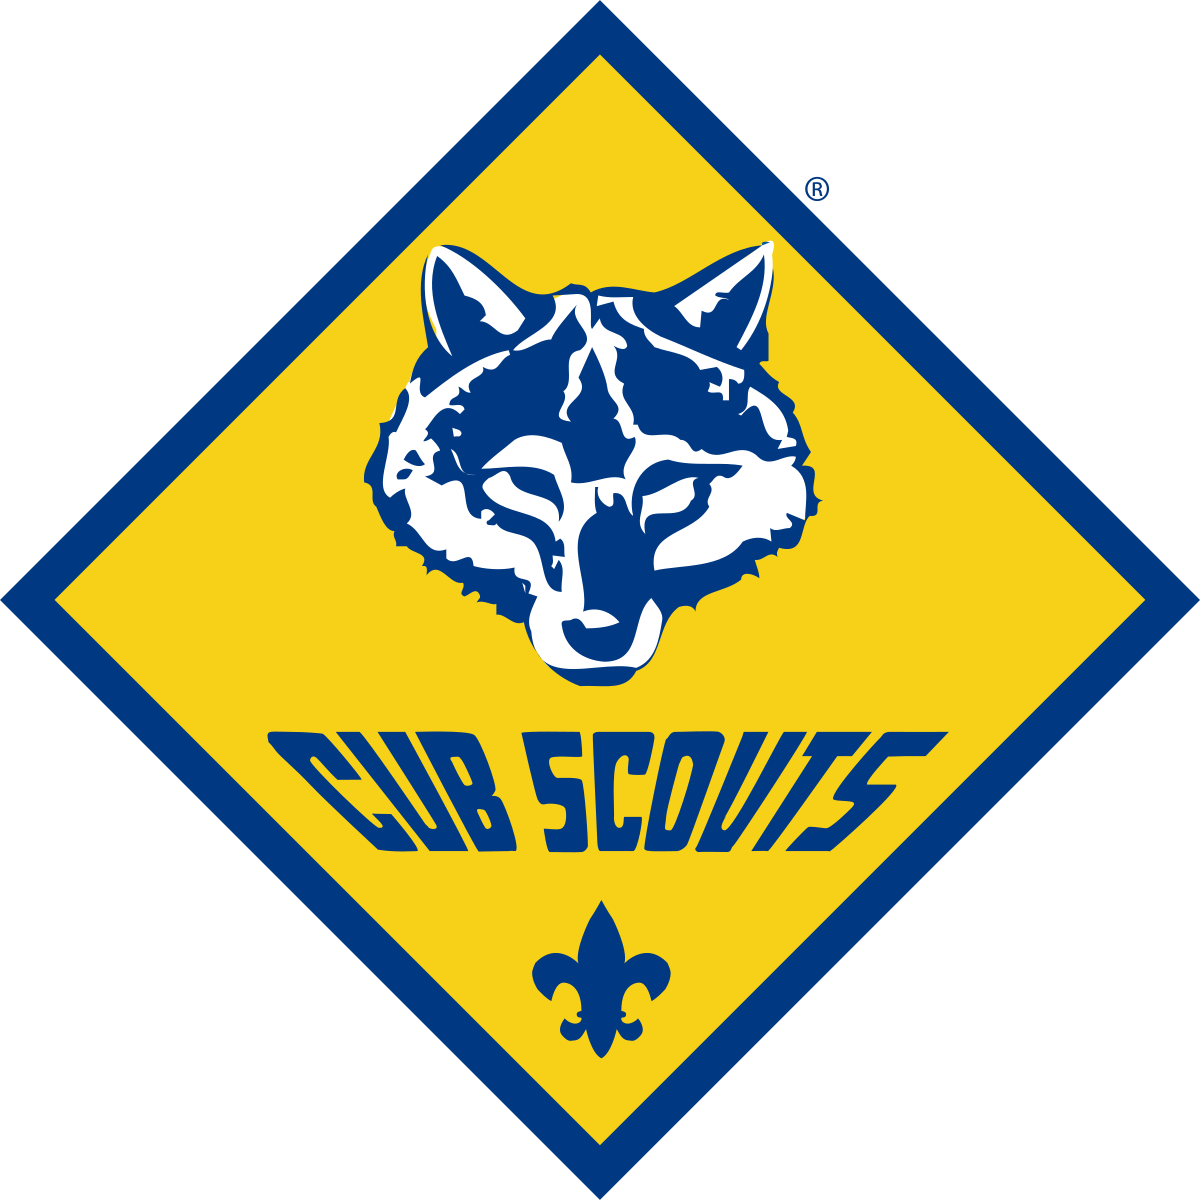 Image result for cub scouts logo"